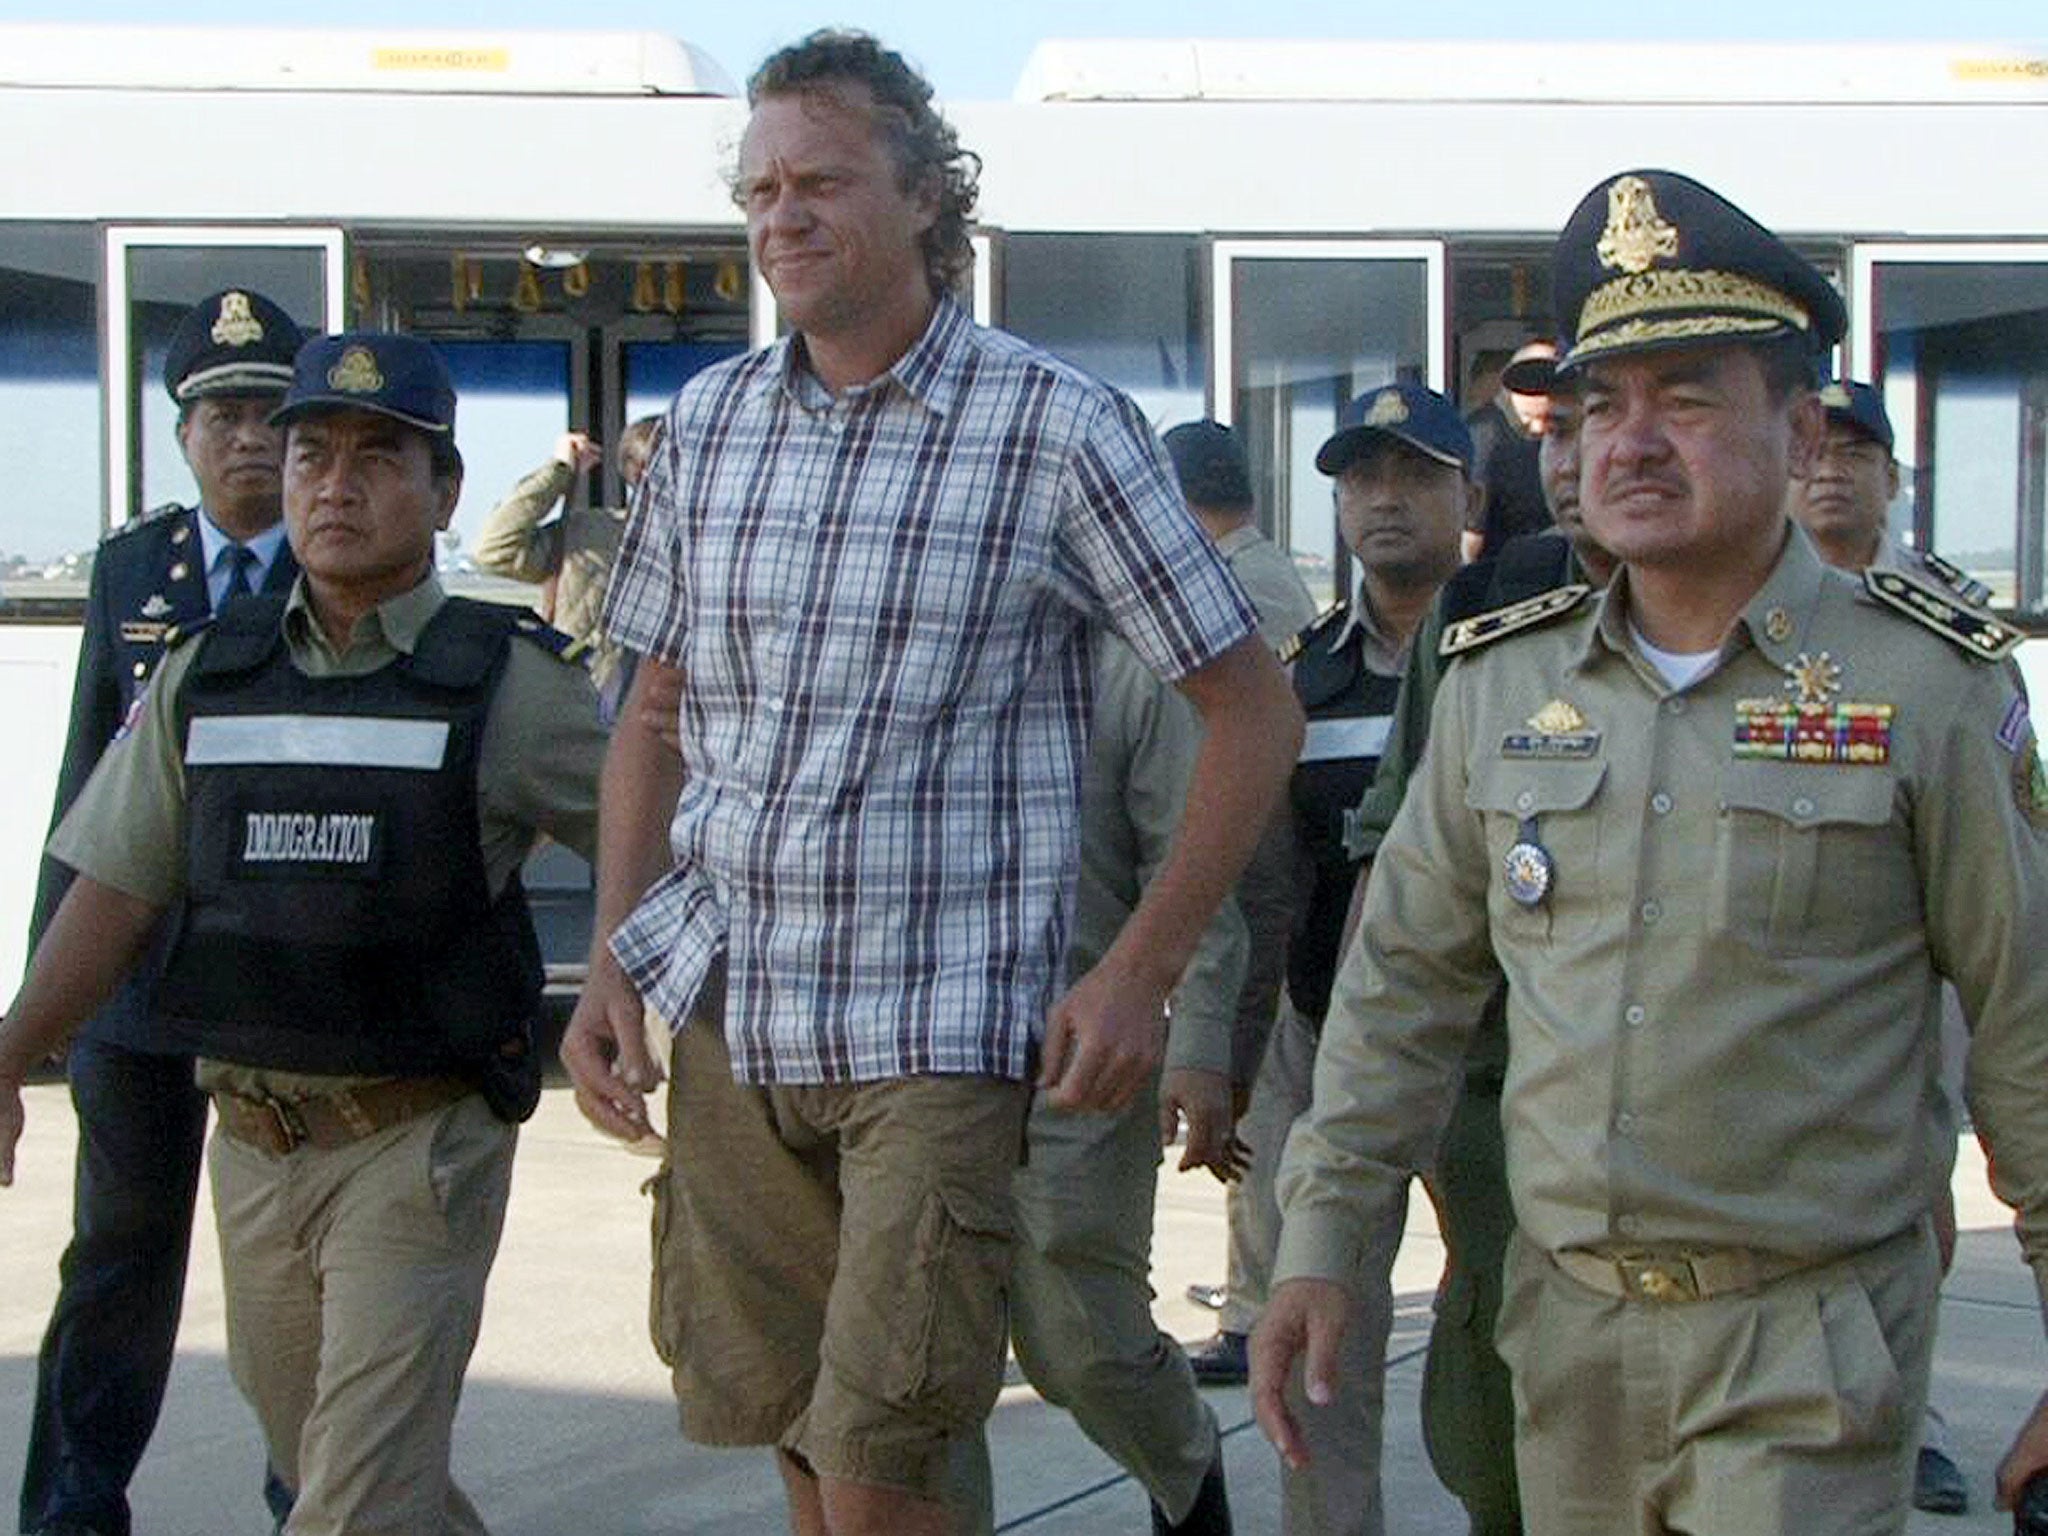 Sergei Polonwky is currently languishing in a Moscow jail, having been extradited from Cambodia